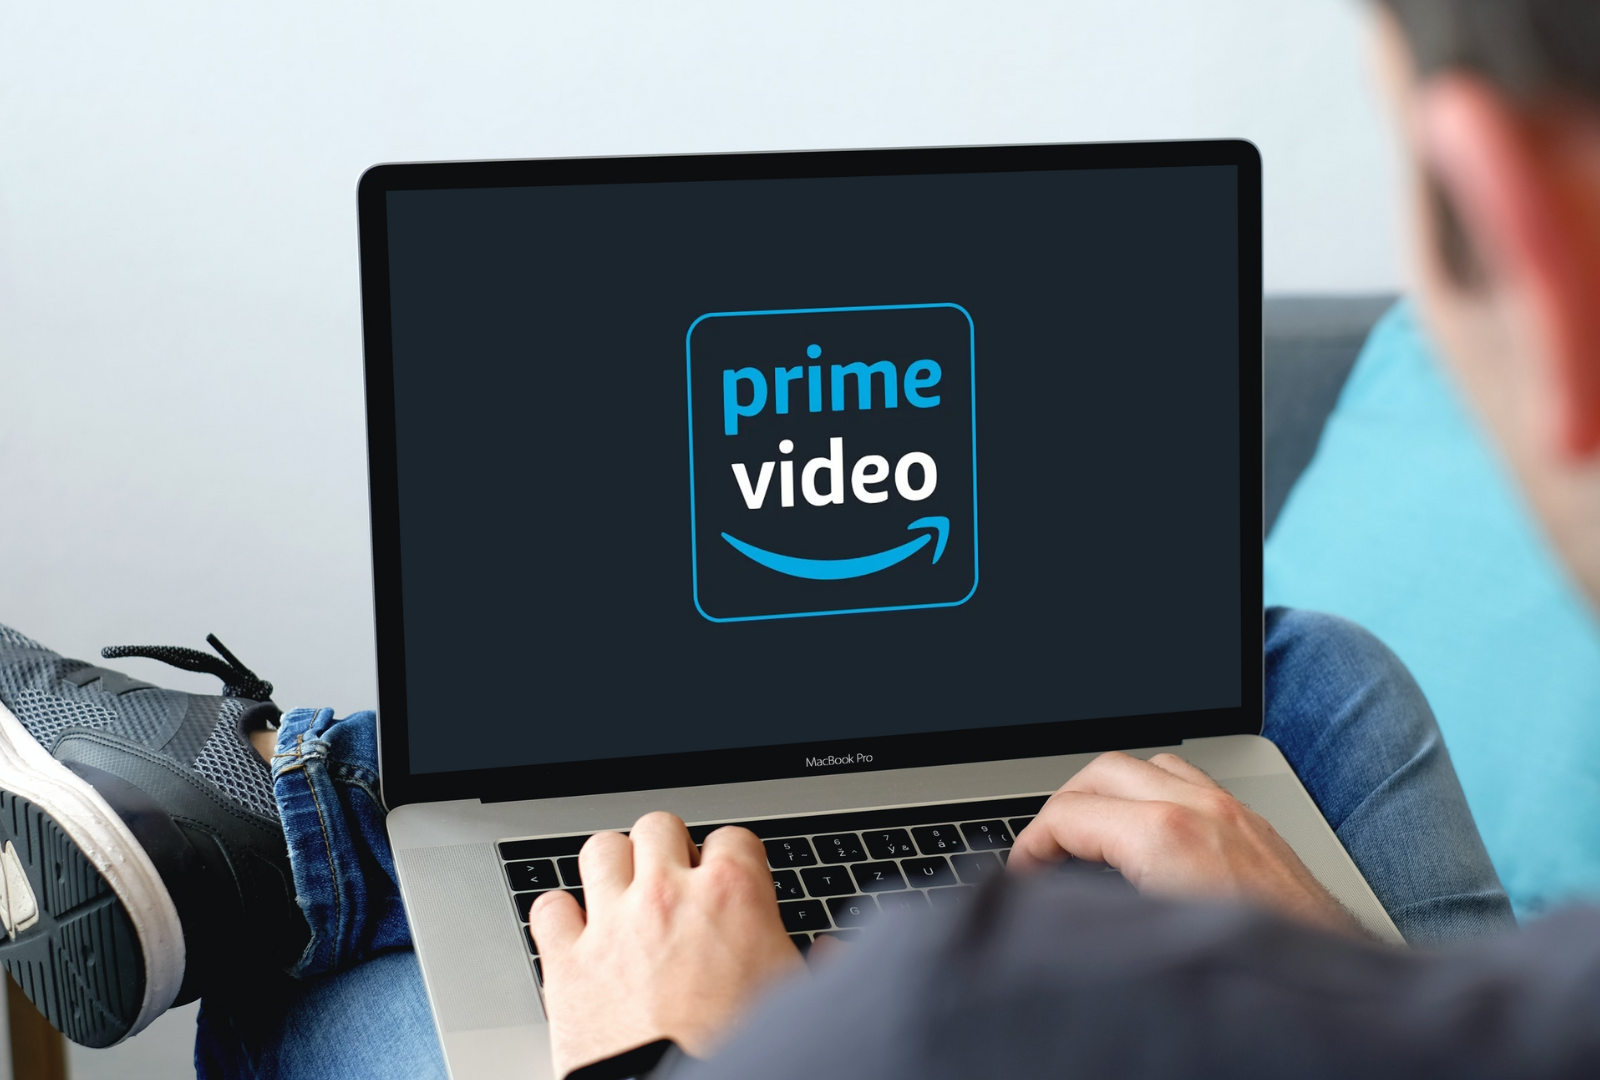 Prime Video: Makes subscription worthwhile